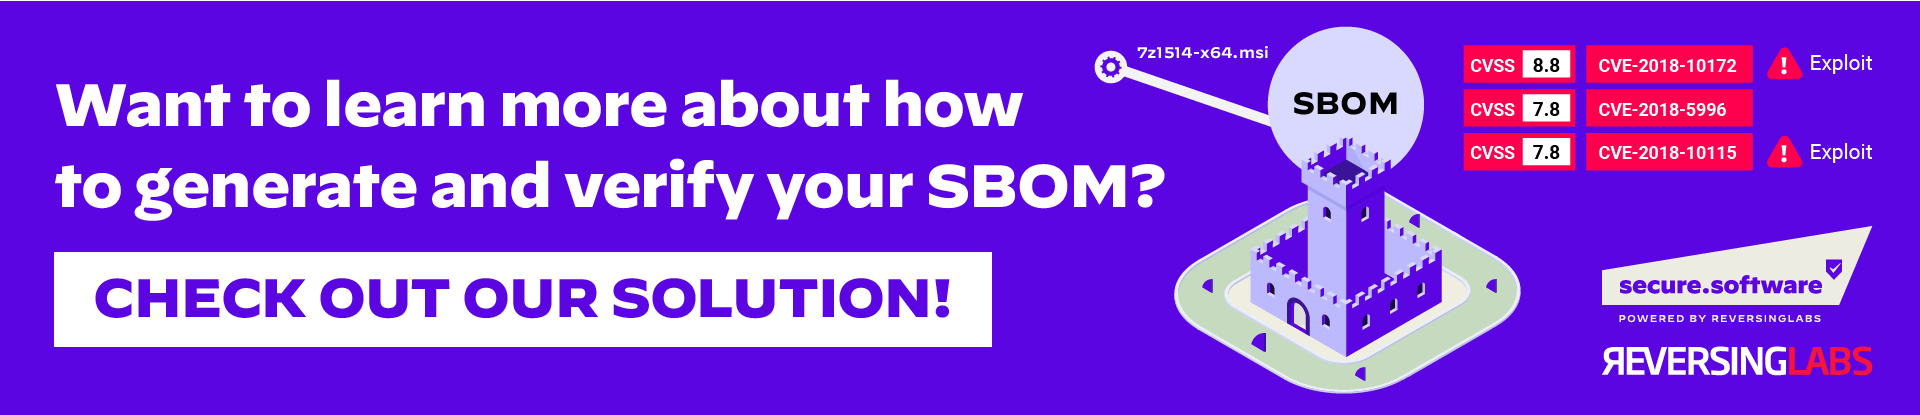 Learn more about SBOM